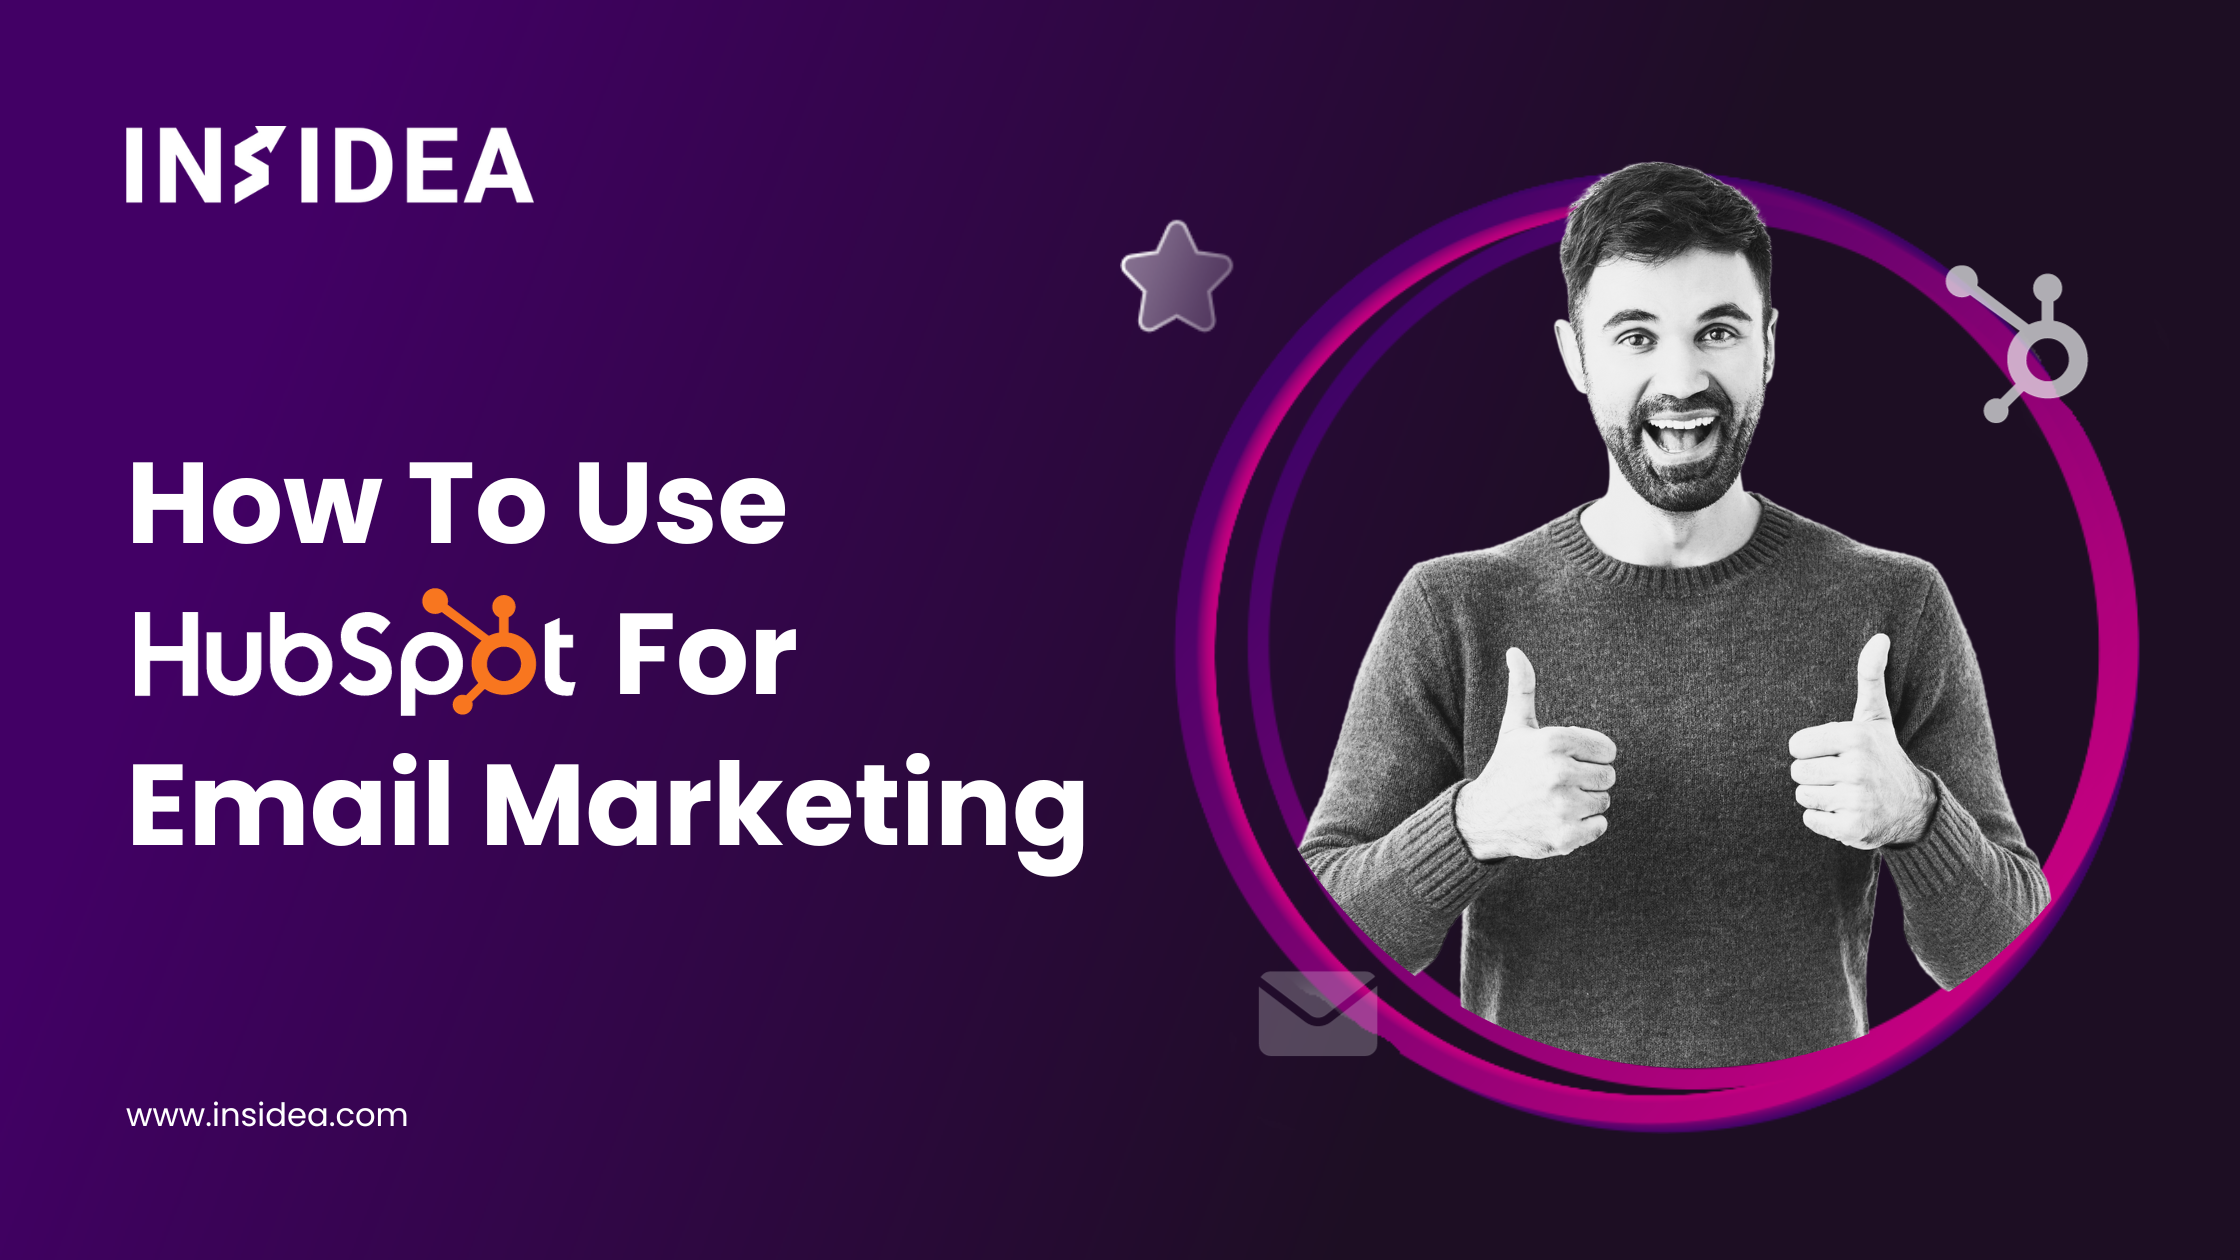 How To Use HubSpot For Email Marketing